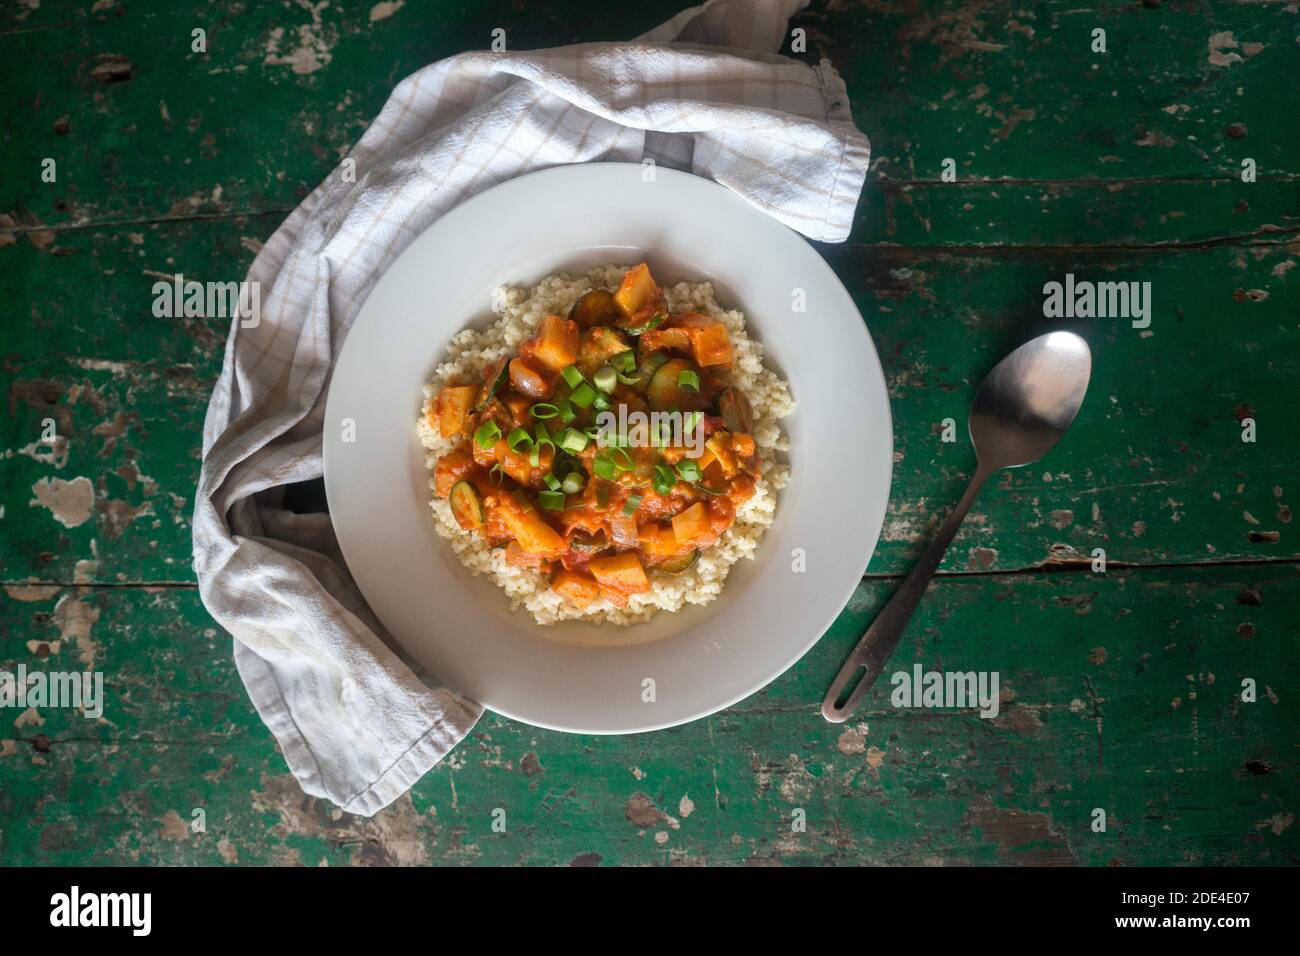 Couscous with sweet potatoes Stock Photo